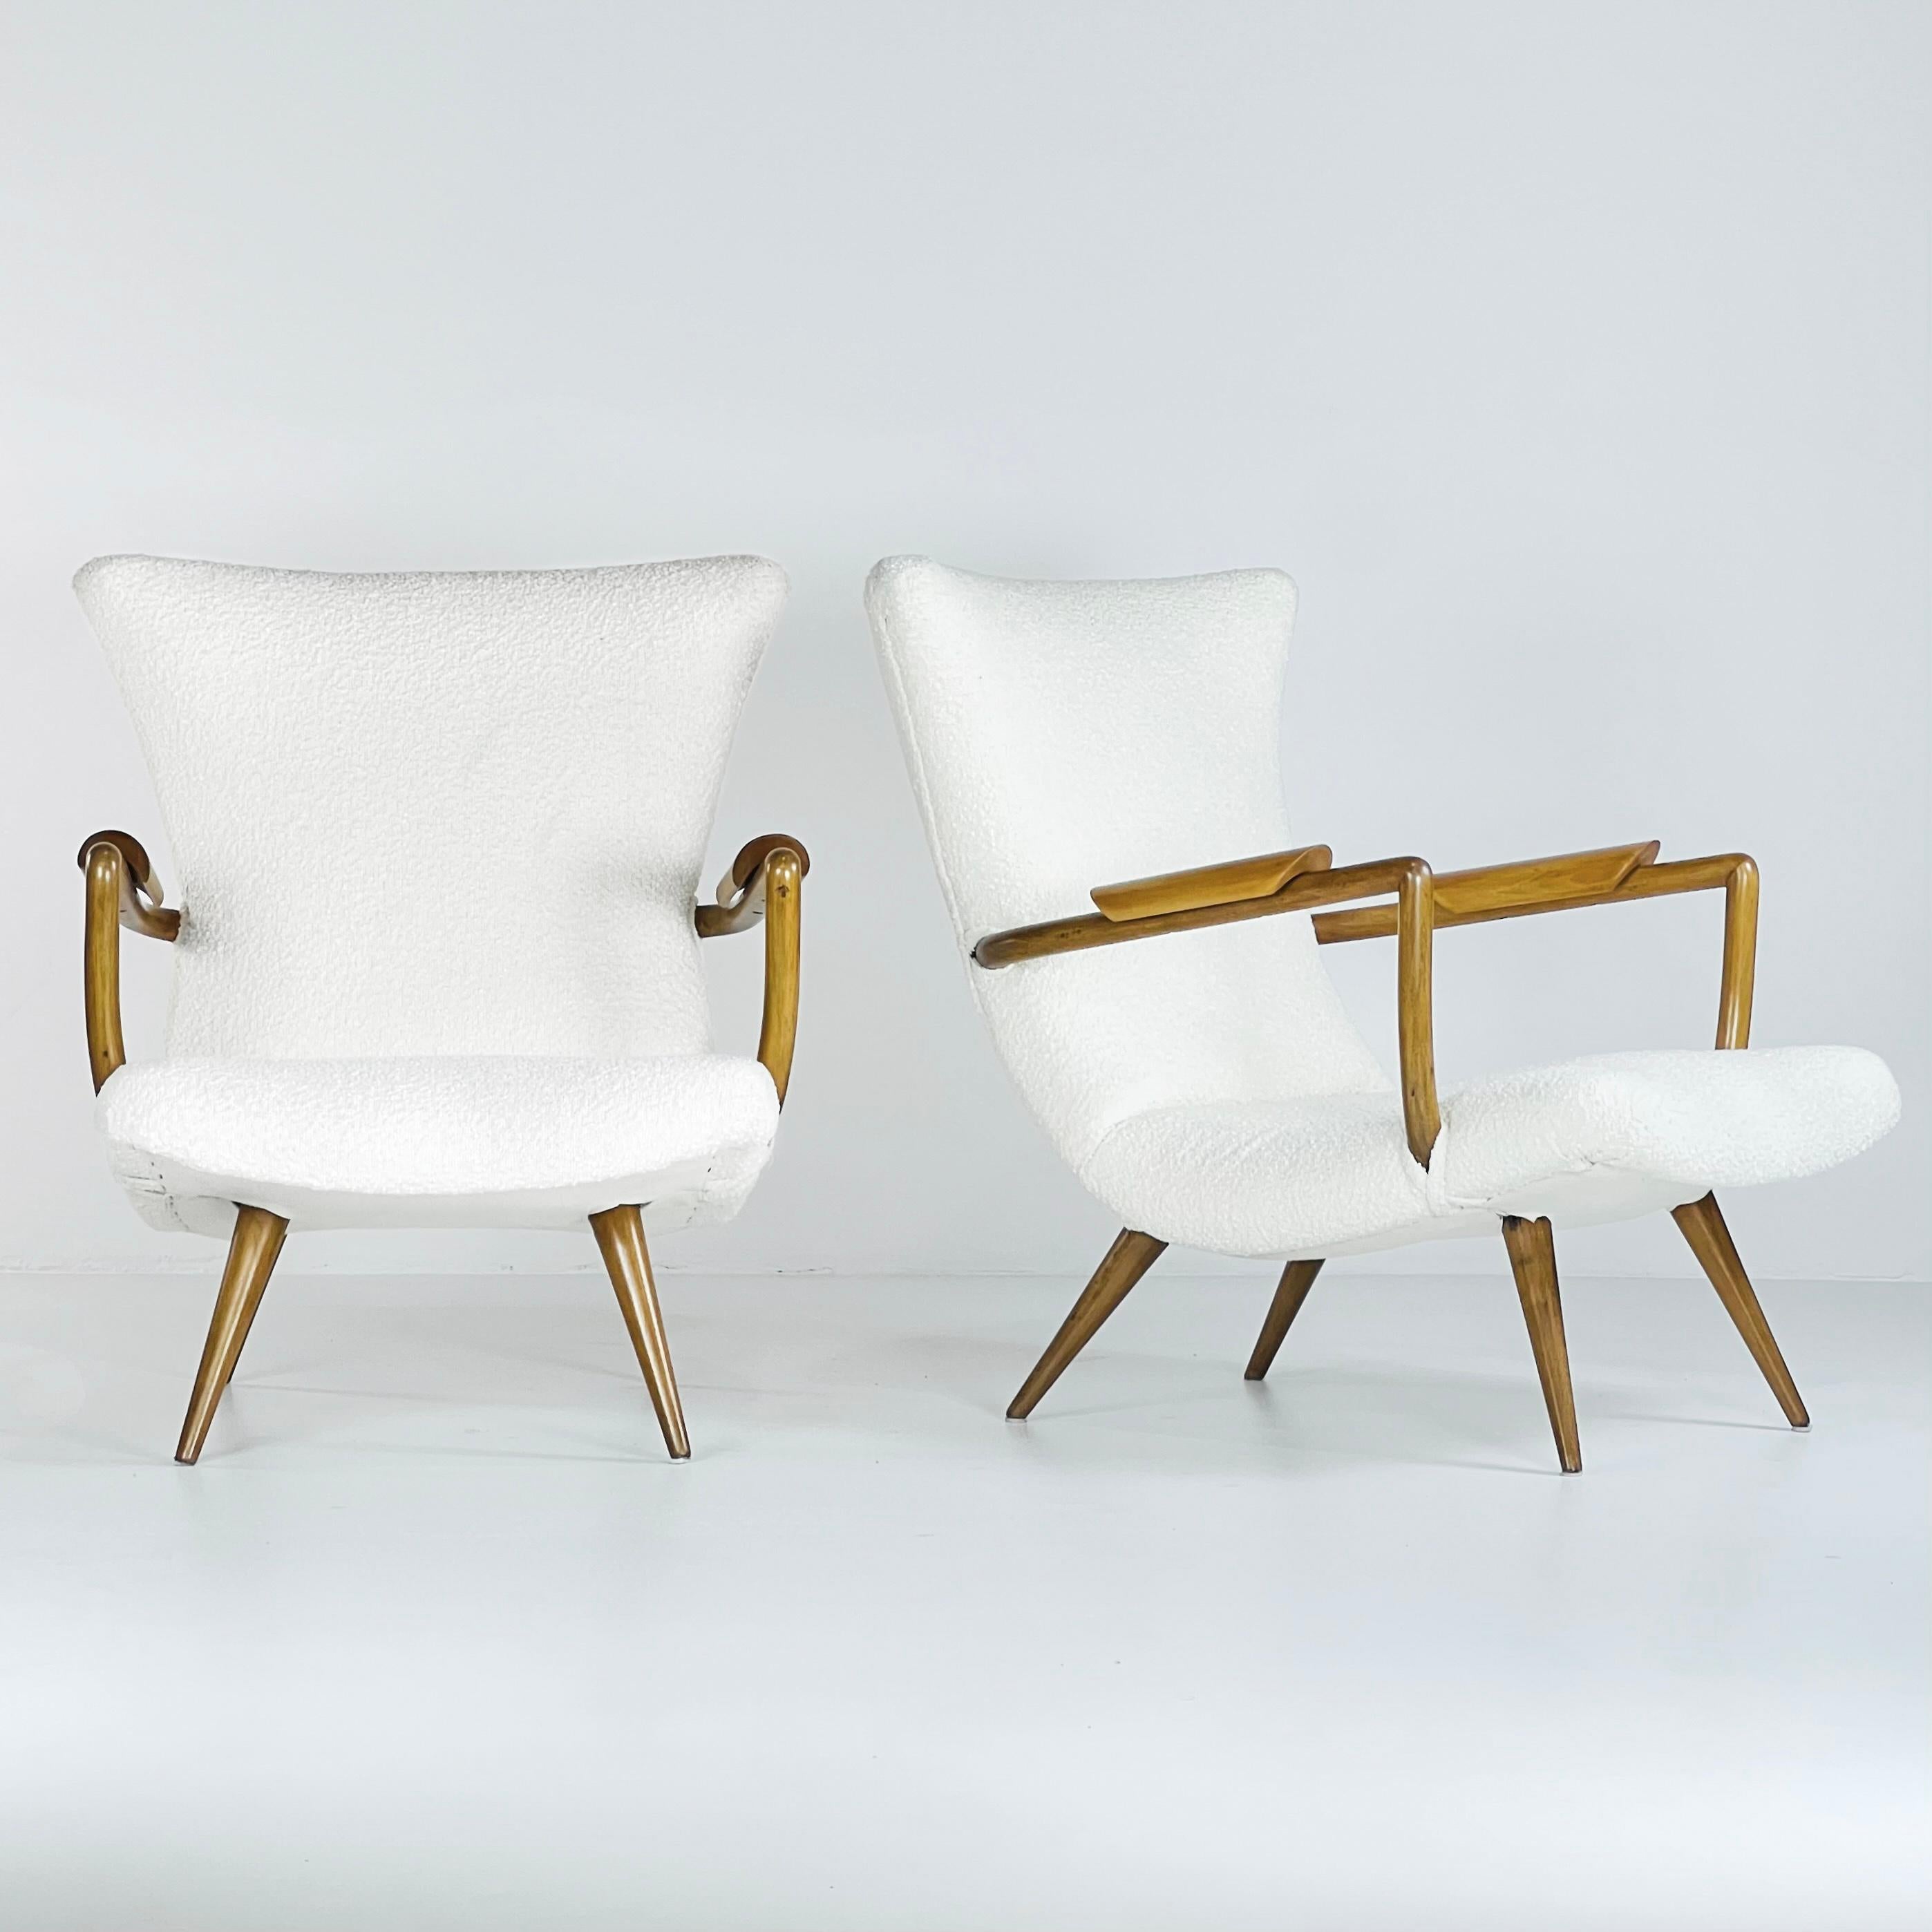 Mid-20th Century Pair of Lounge Chairs in Caviúna Wood Brazil 1950s Designer Giuseppe Scapinelli